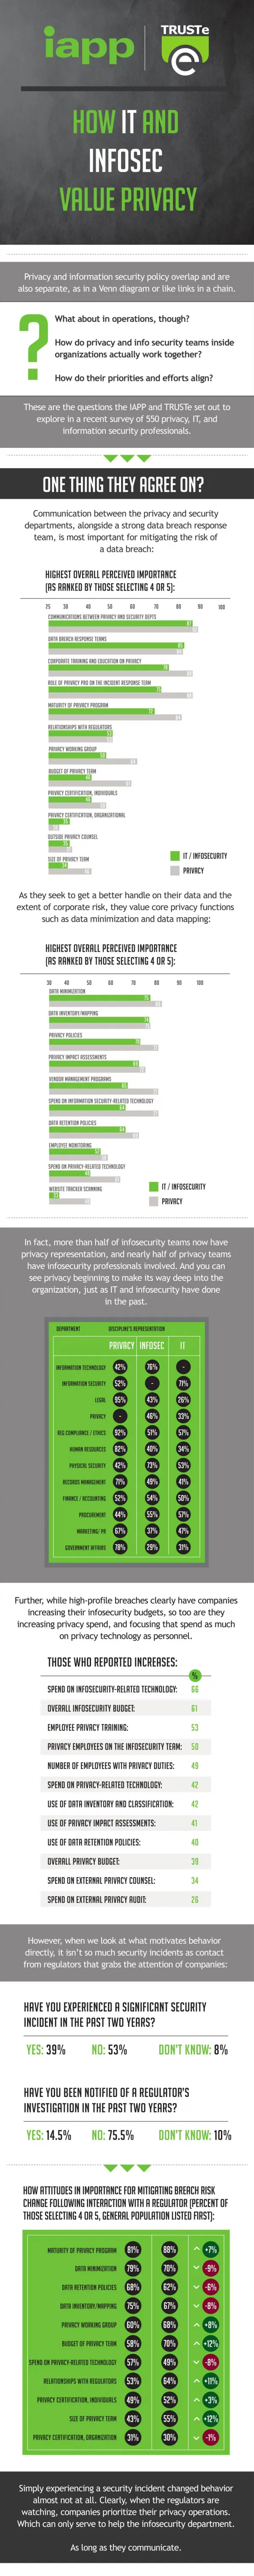 How IT and Info Sec value privacy? Infographic from TRUSTe & IAPP